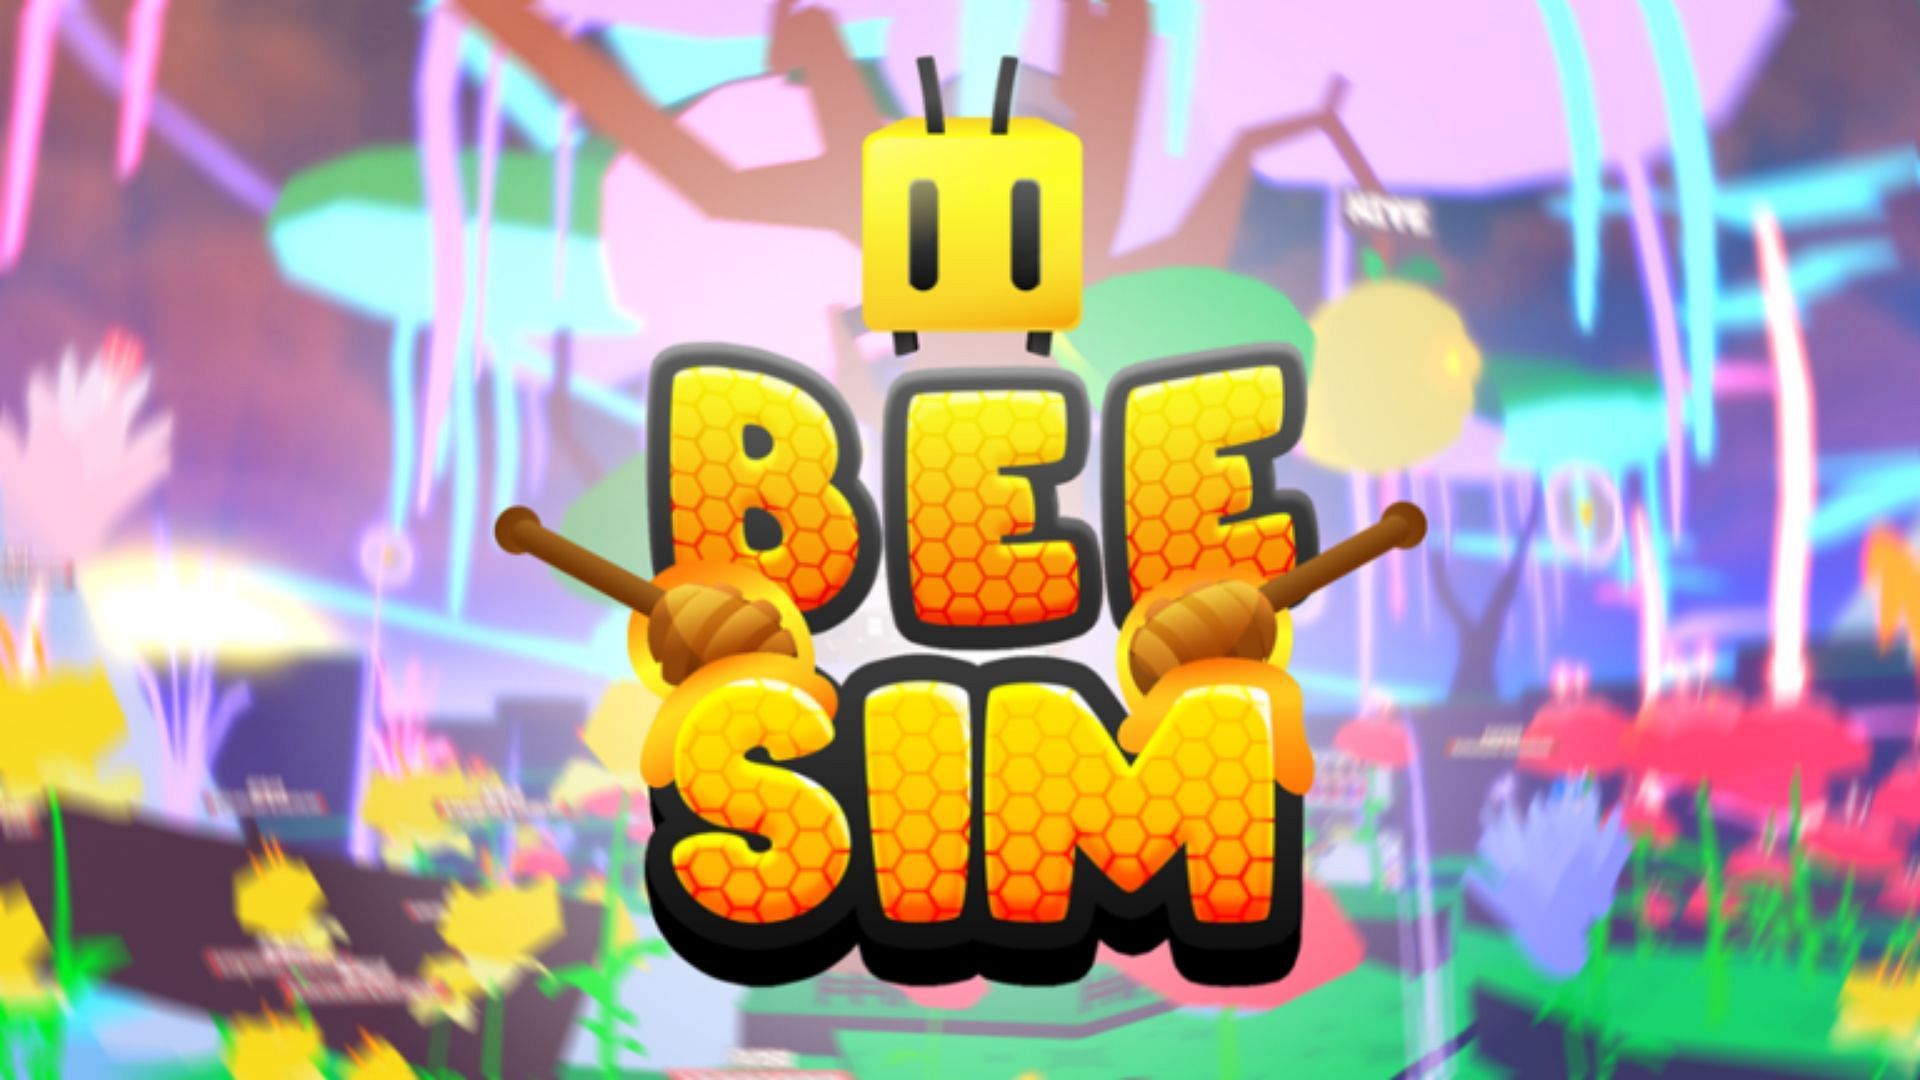 Codes for Bee Sim and their importance (Image via Roblox)